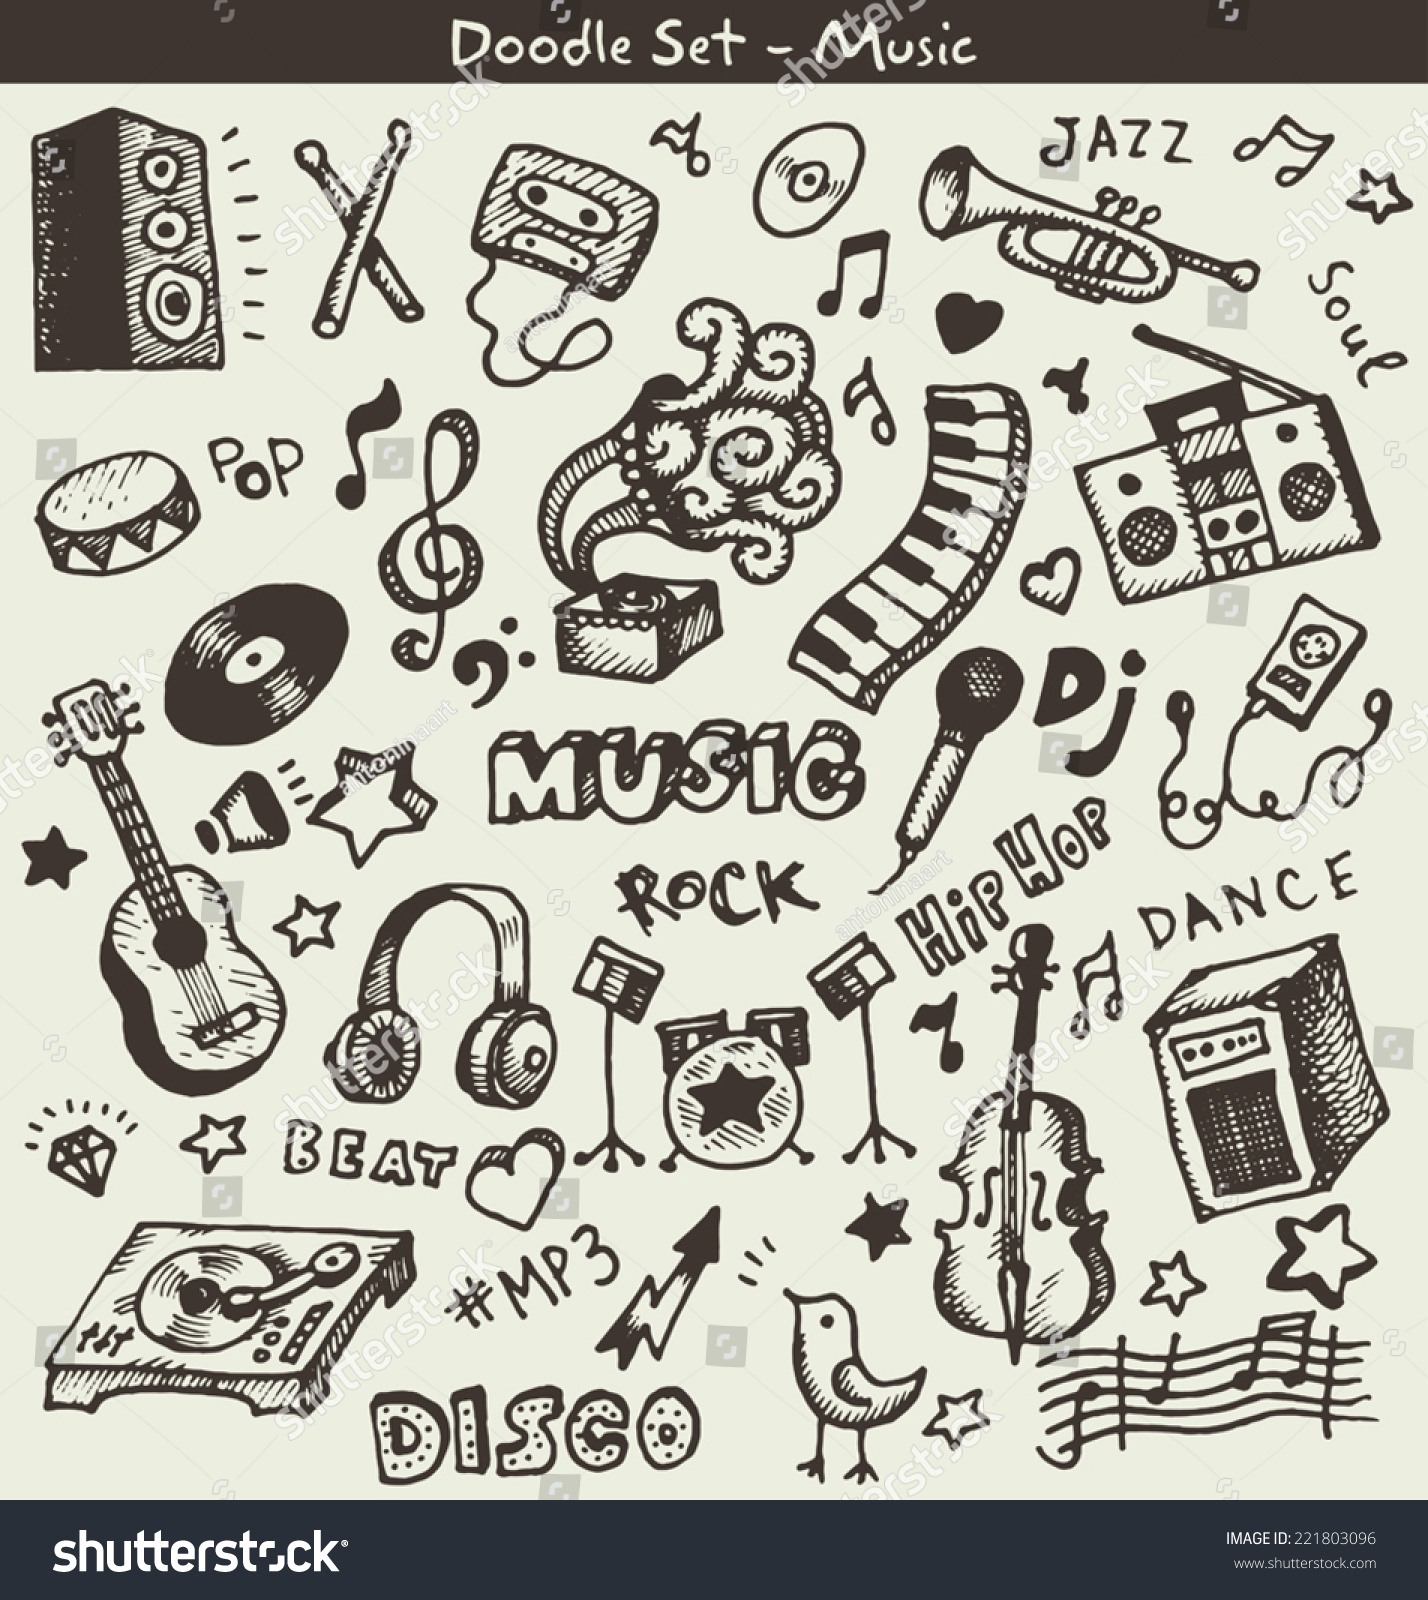 Music Doodles Vector Stock Vector Royalty Free 221803096